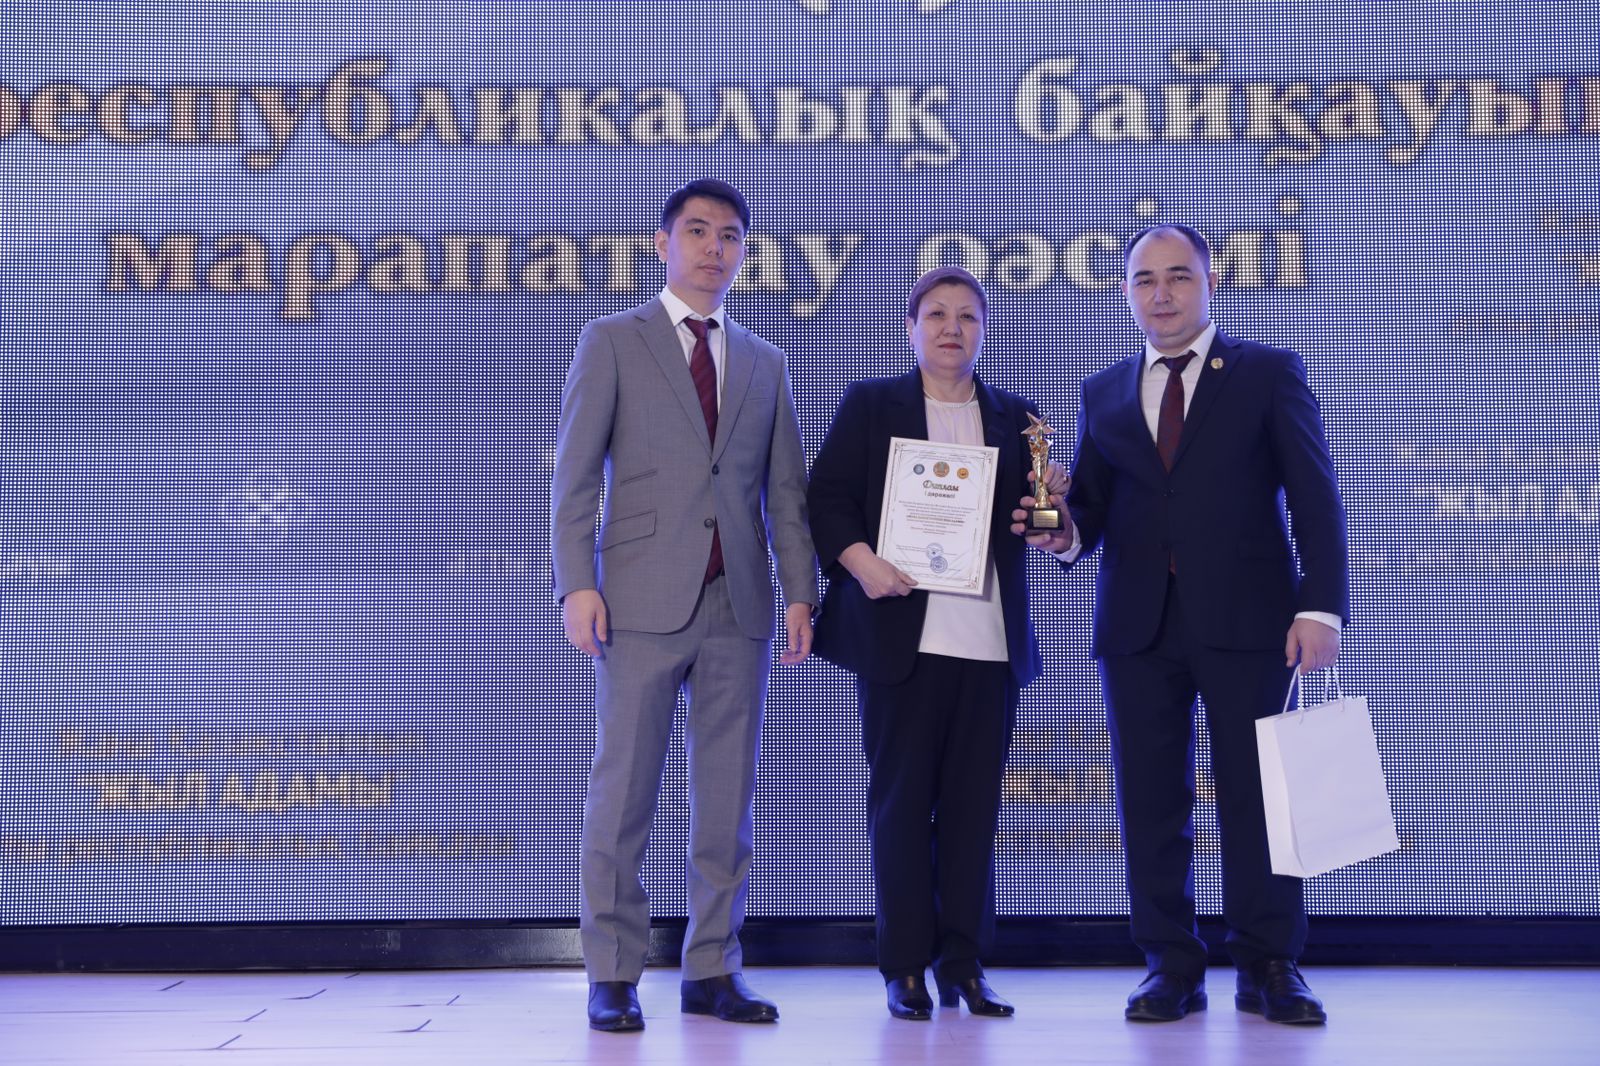 KazNU scientist became "Person of the Year"